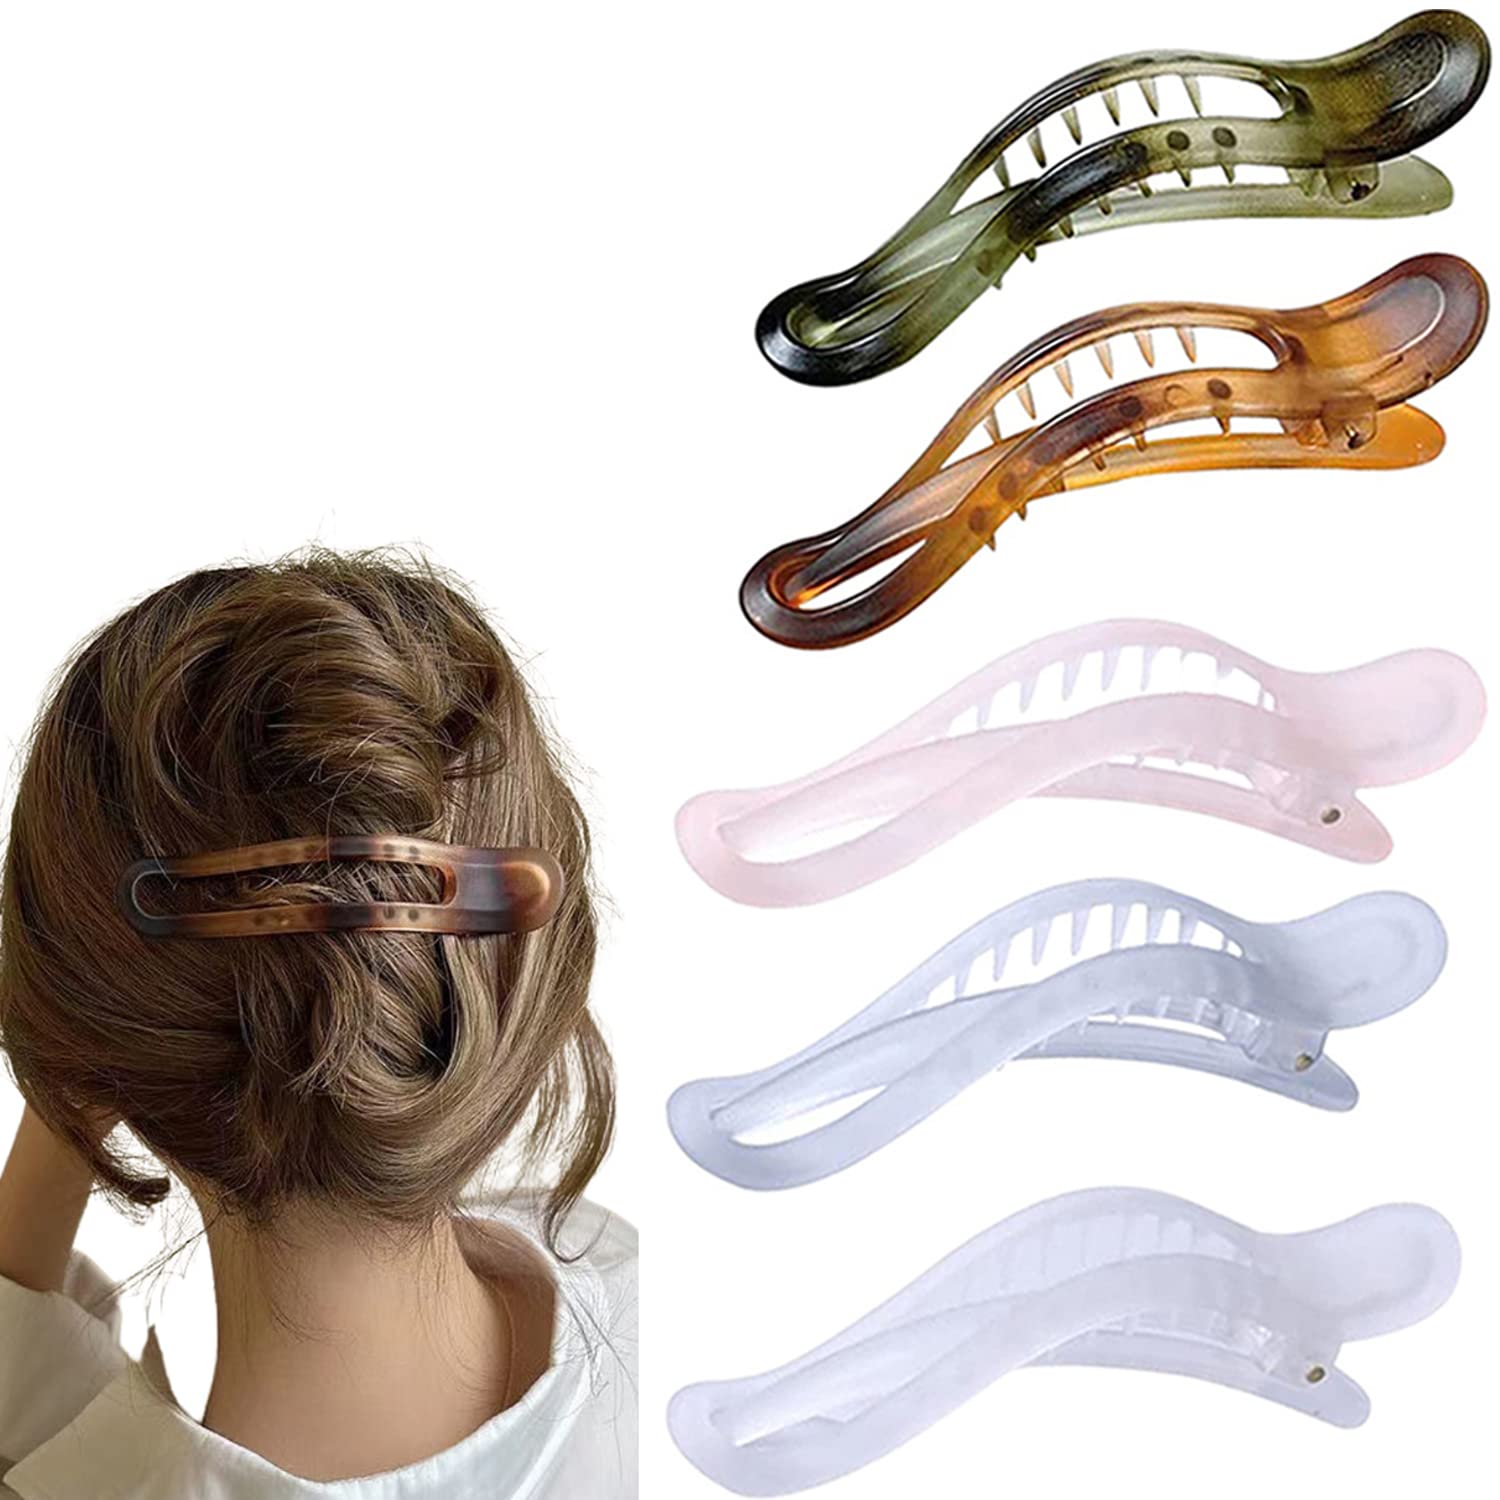 Top 48 image hair clips for thin hair 